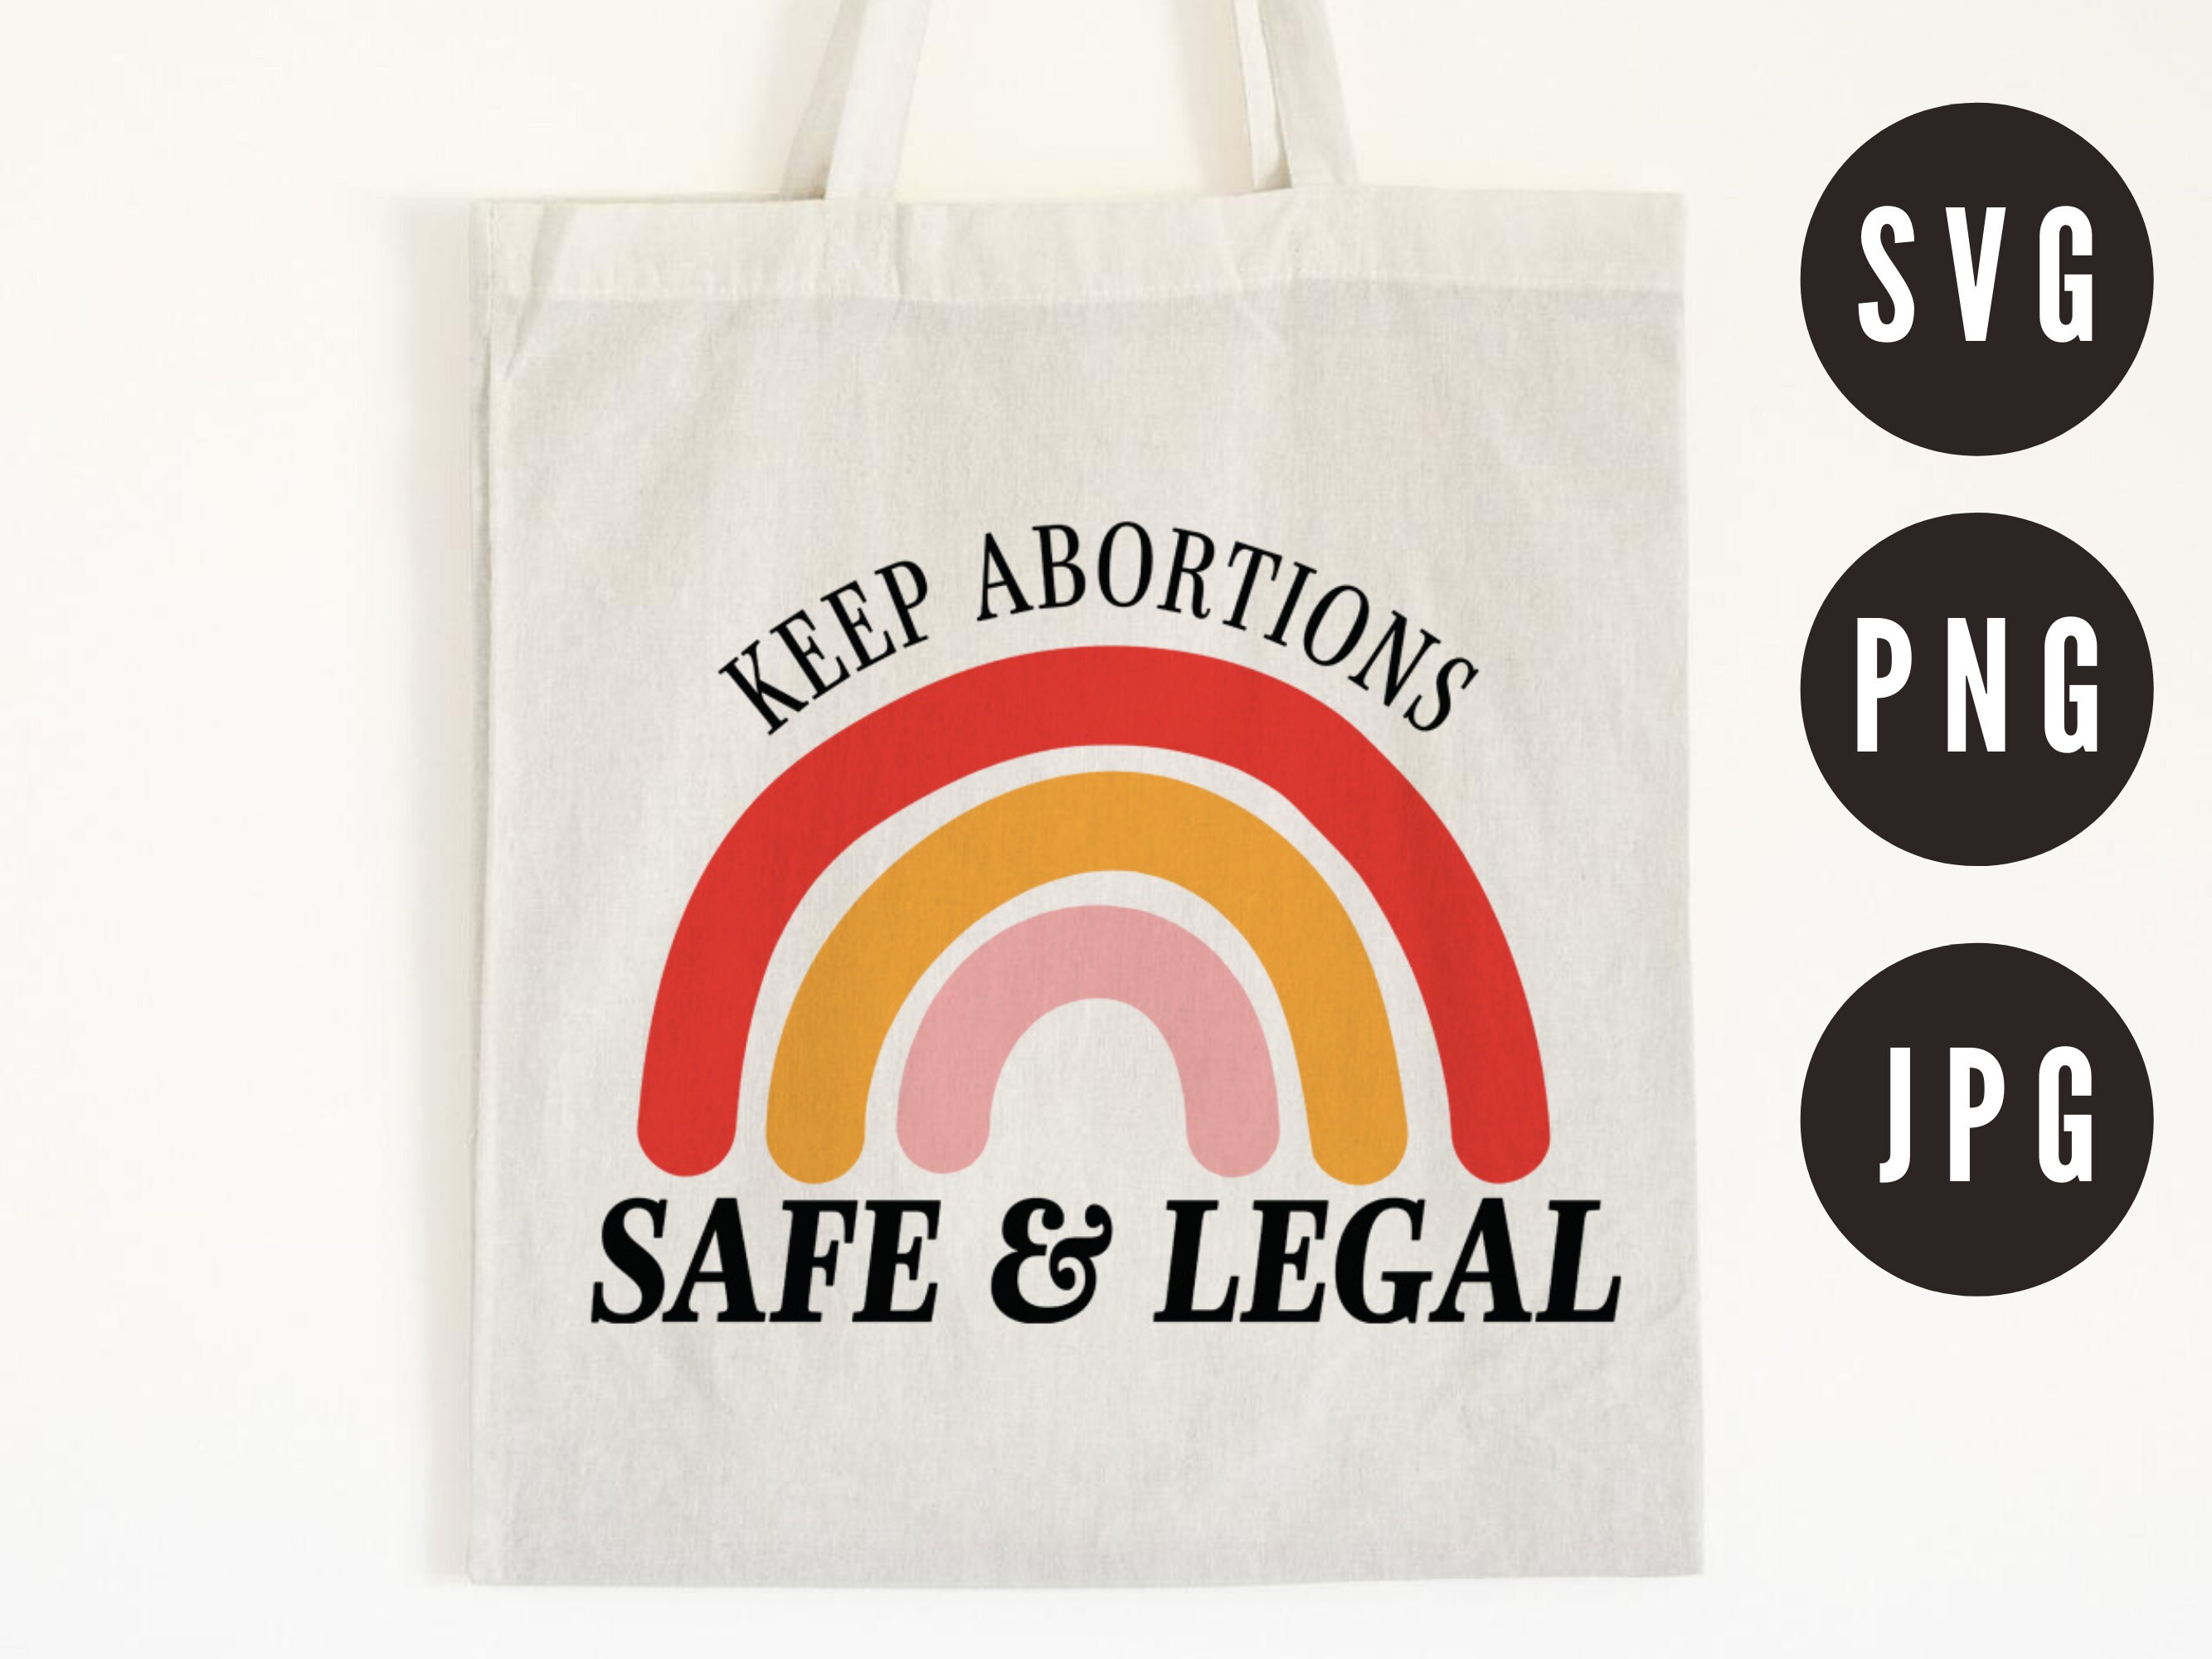 Abortion Rights SVG  retro pro-choice svg, pro-choice svg png, keep abortions safe and legal, reproductive rights svg, pro-roe svg png